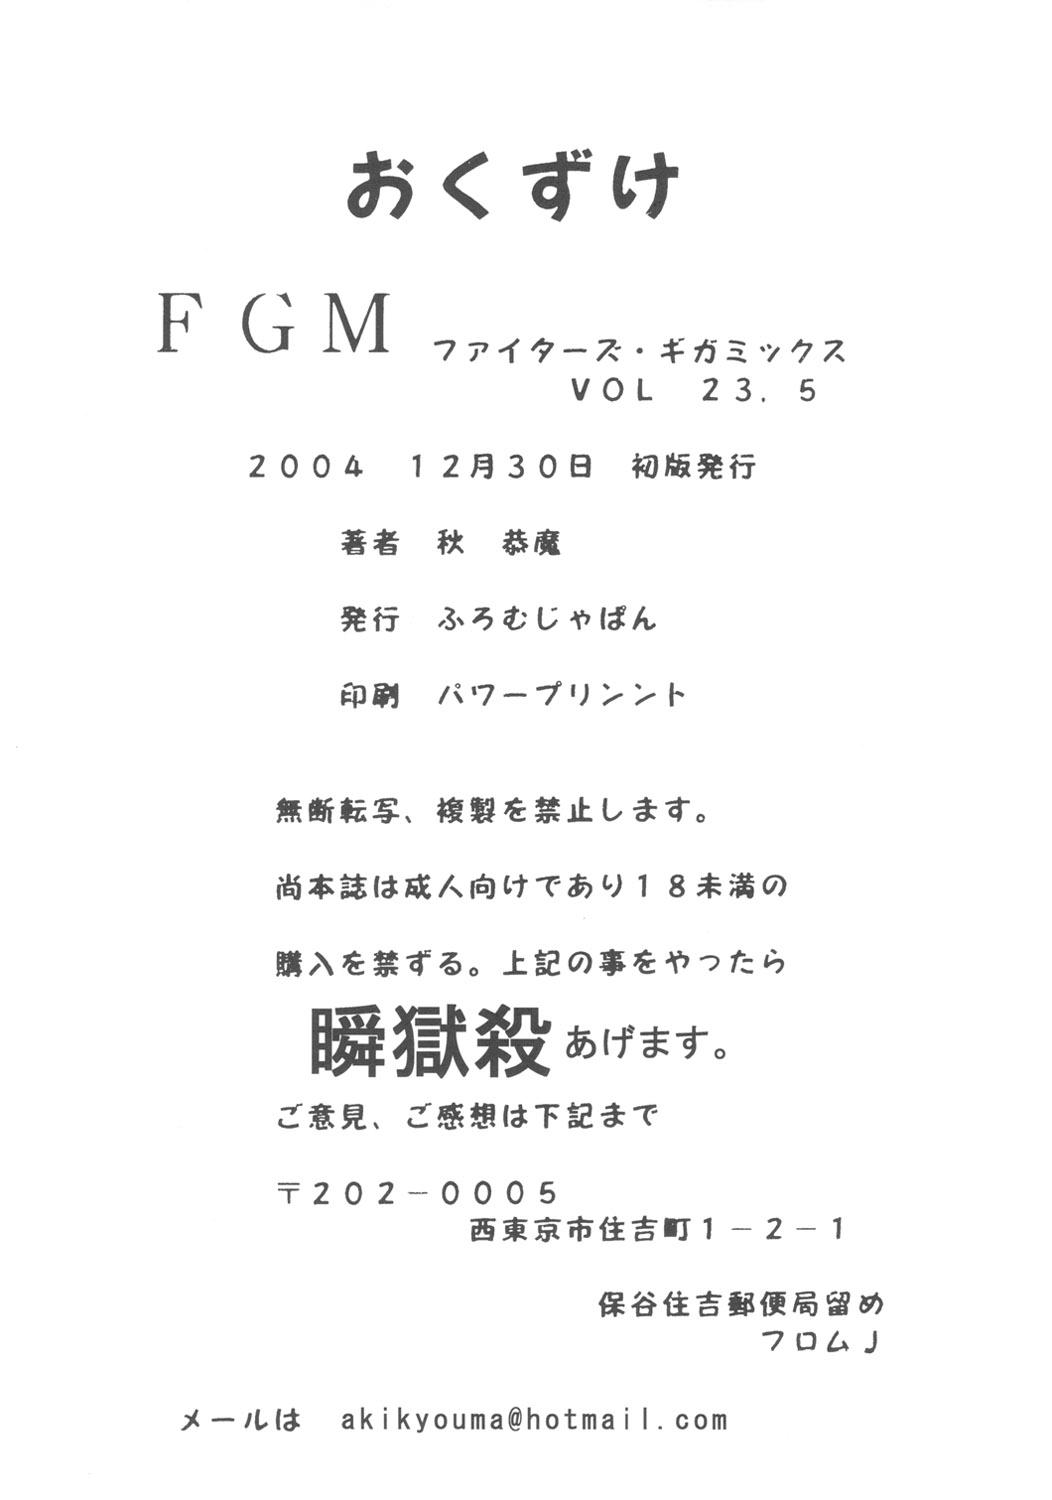 FIGHTERS GIGAMIX FGM Vol. 23.5 14